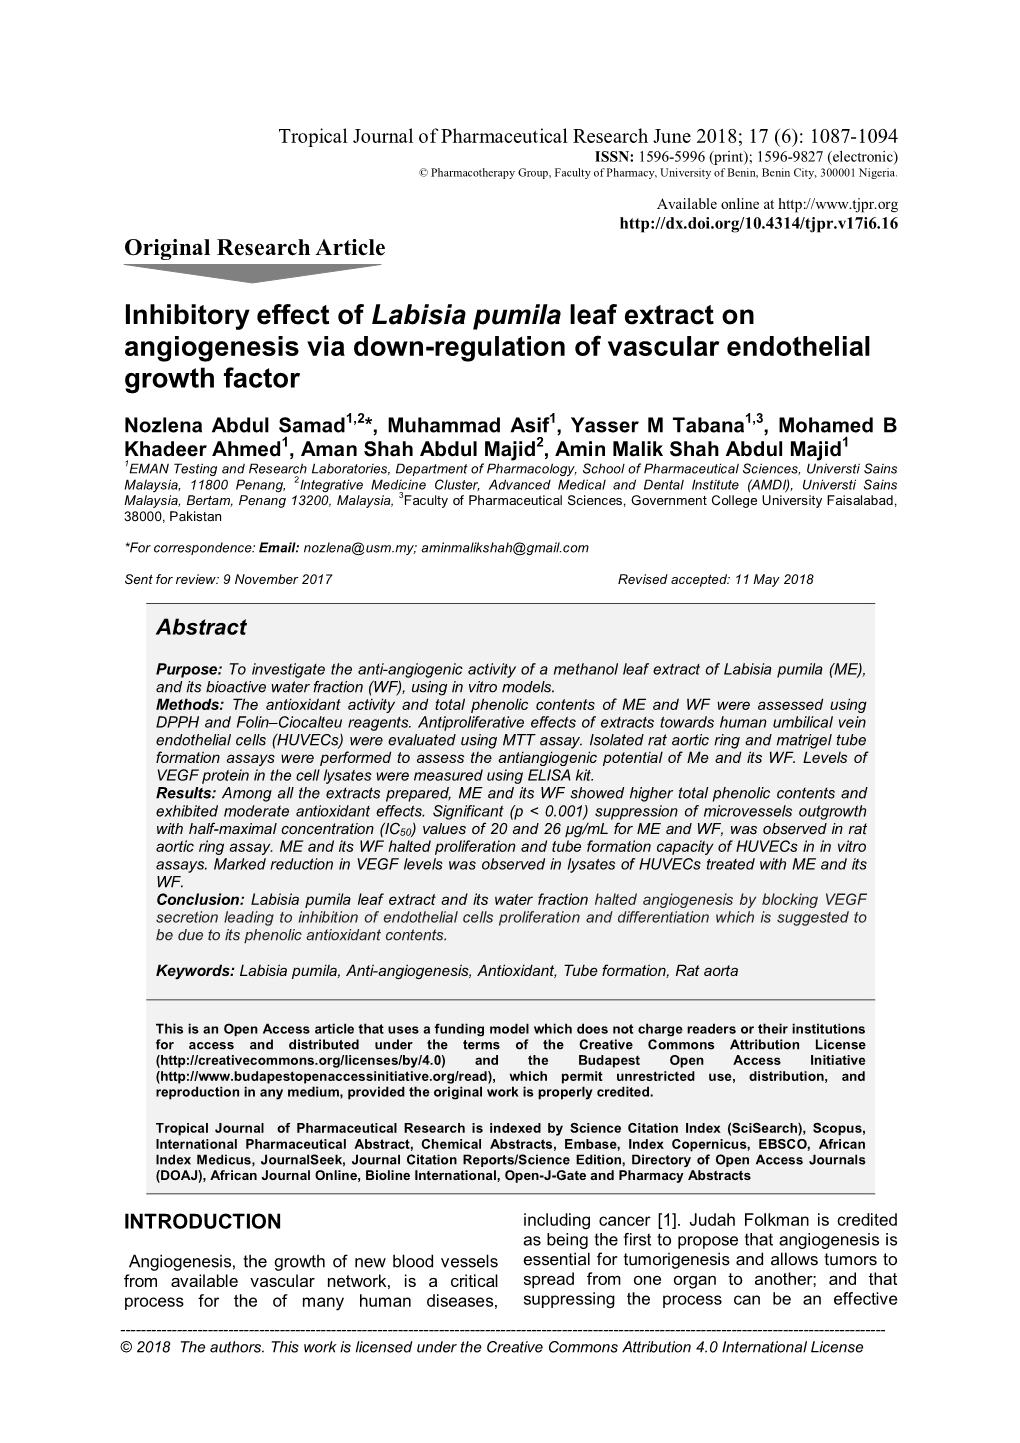 Inhibitory Effect of Labisia Pumila Leaf Extract on Angiogenesis Via Down-Regulation of Vascular Endothelial Growth Factor